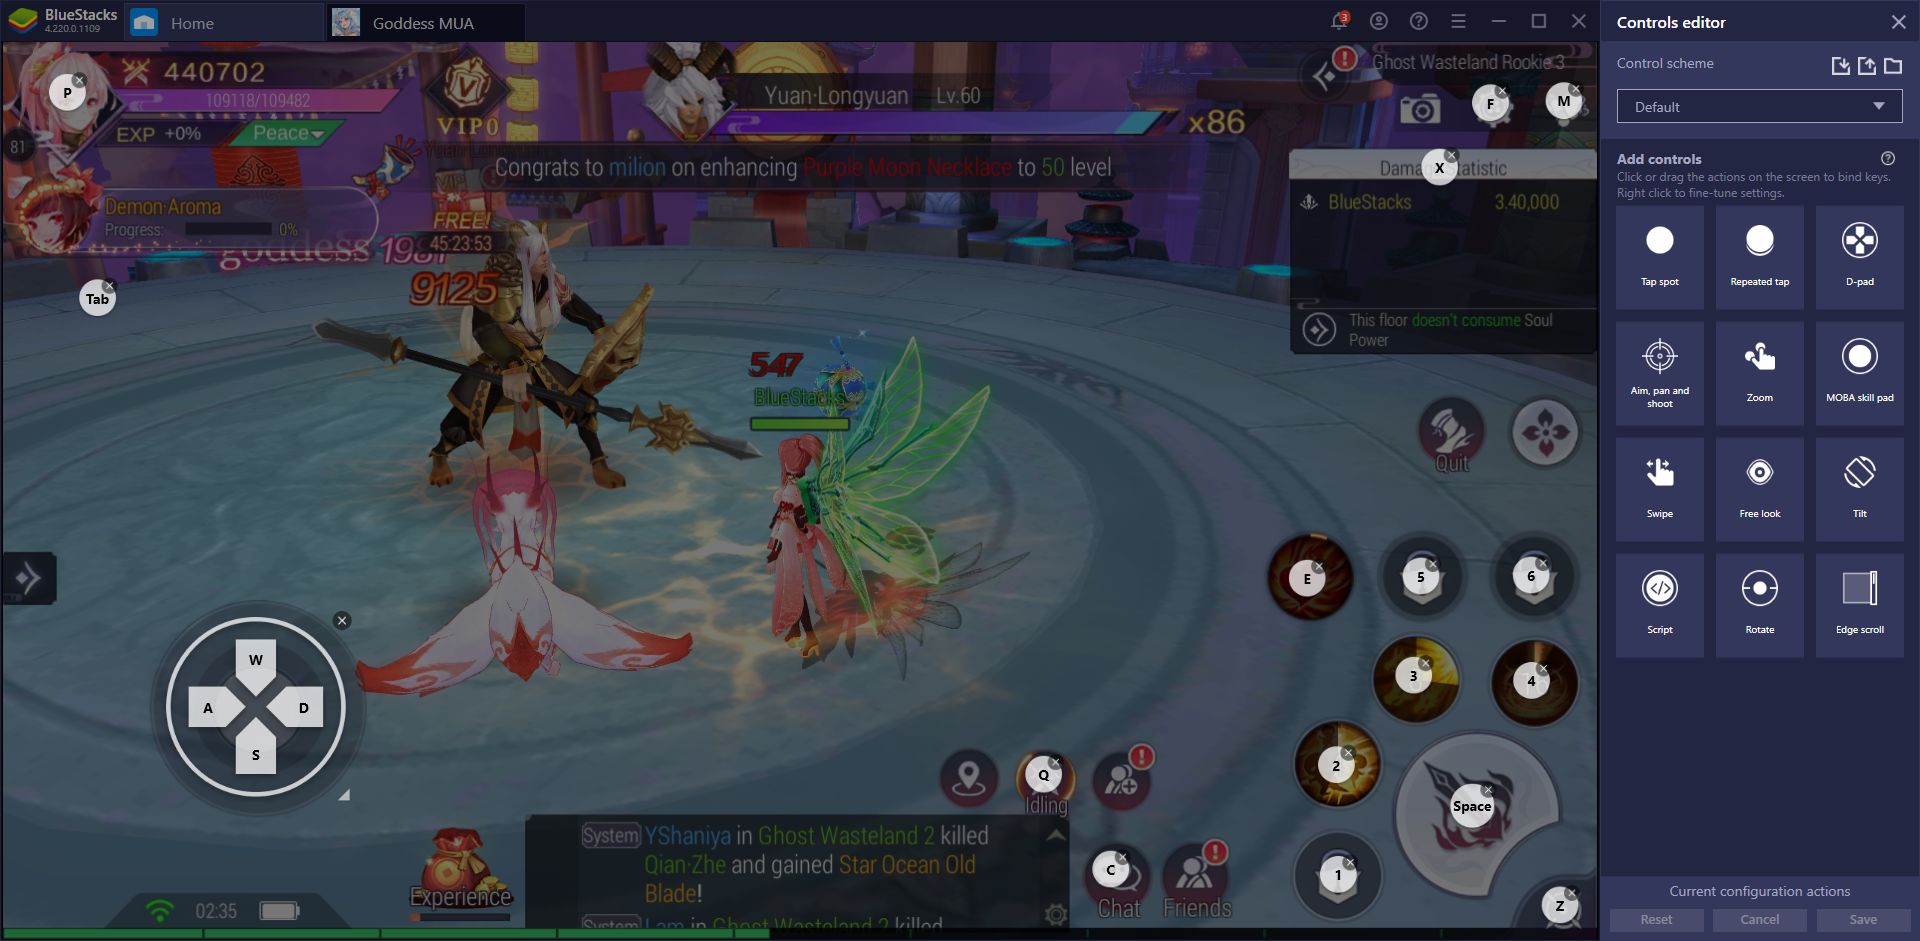 Goddess MUA on PC - Dive Into the Hottest New Mobile MMORPG on PC With BlueStacks